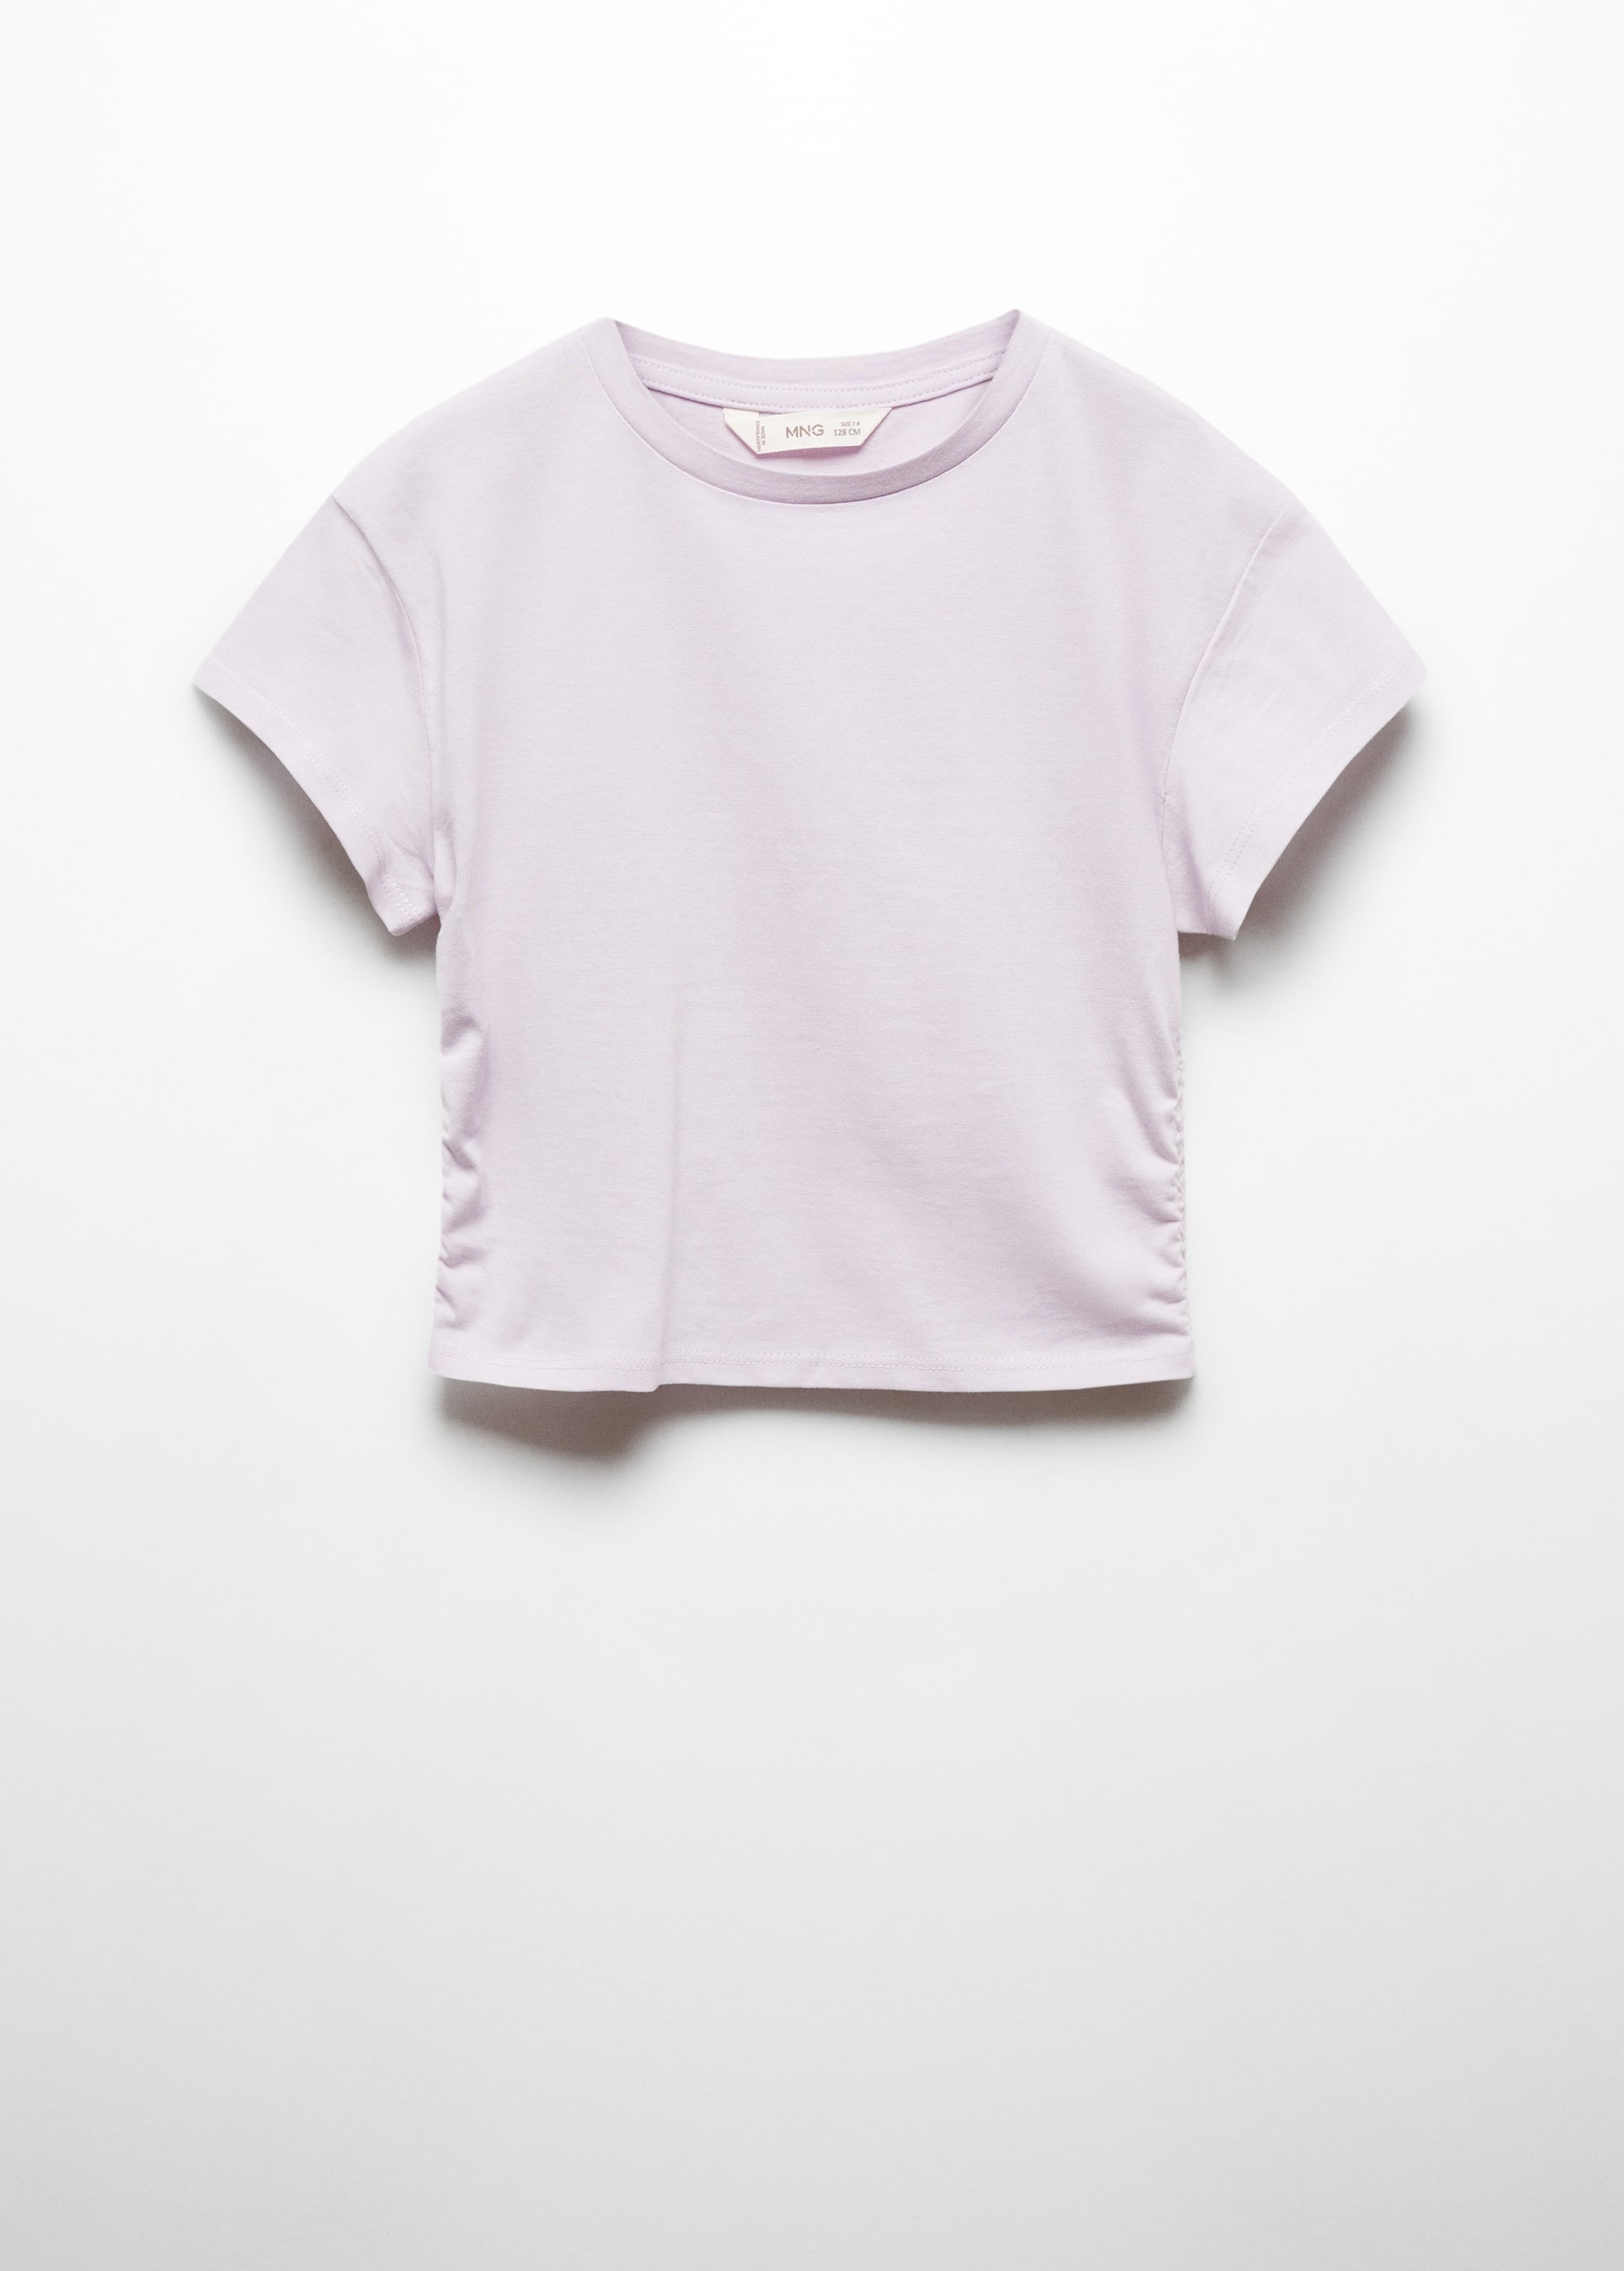 Cotton t-shirt with pucker detail - Article without model